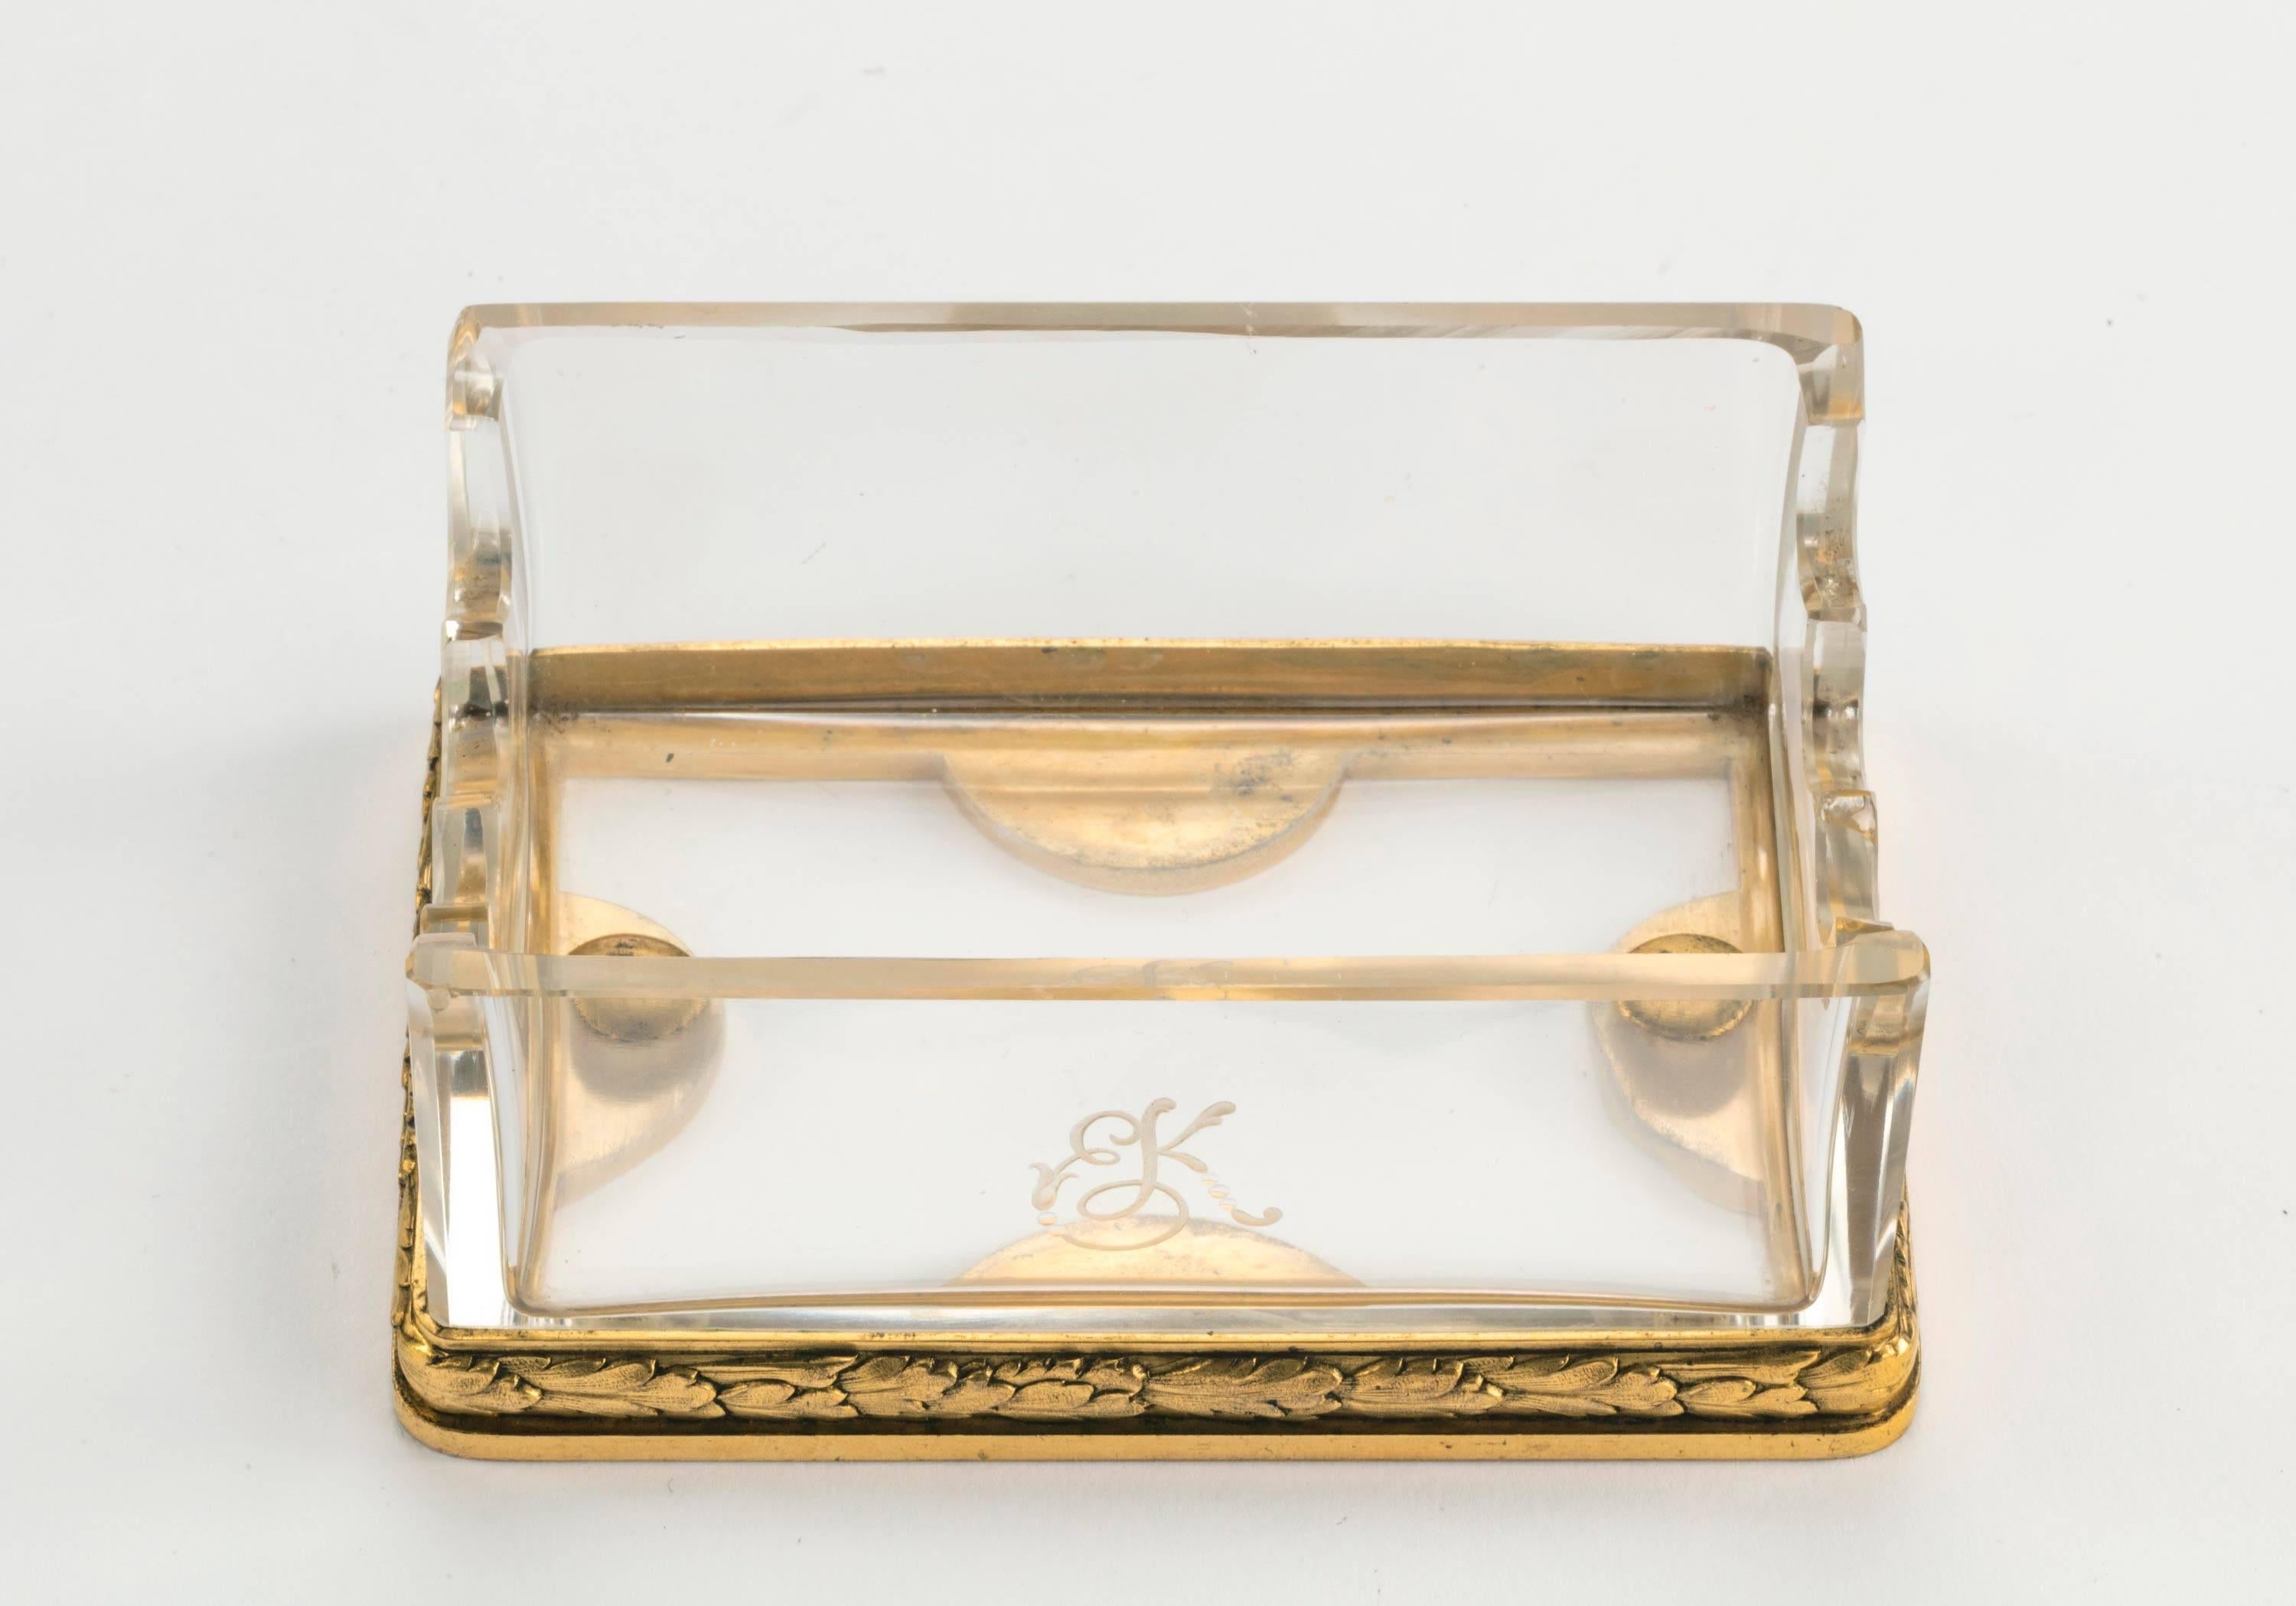 A gilt bronze and glass shaped pen holder. Signed with the hallmark of A. Risler & Carre, Paris.